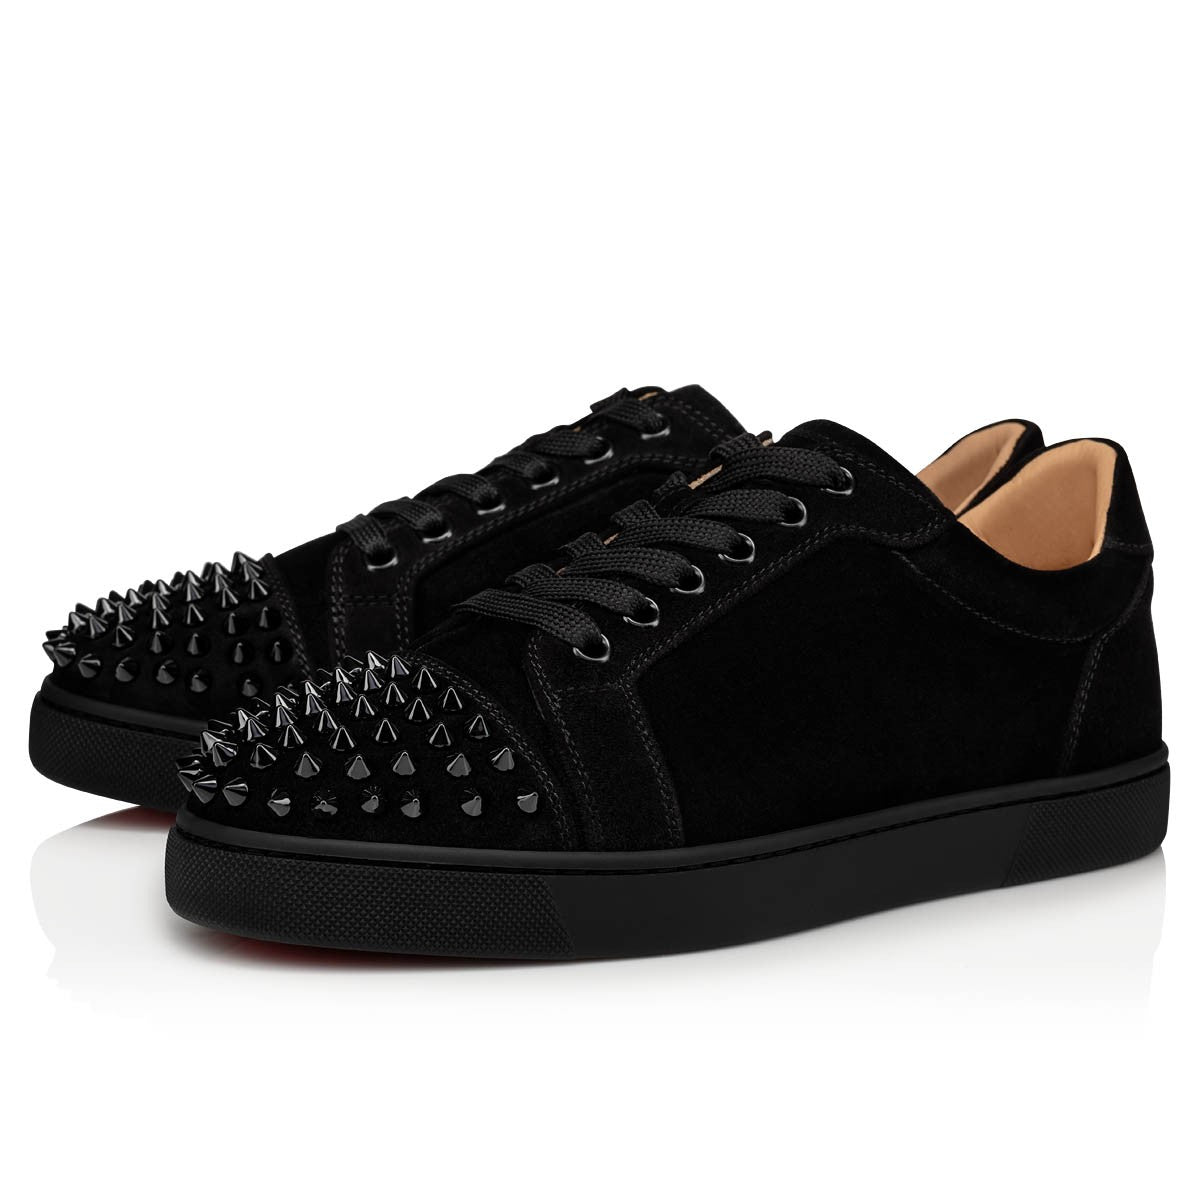 Vieira Spikes Suede Calf and Spikes Black Sneakers